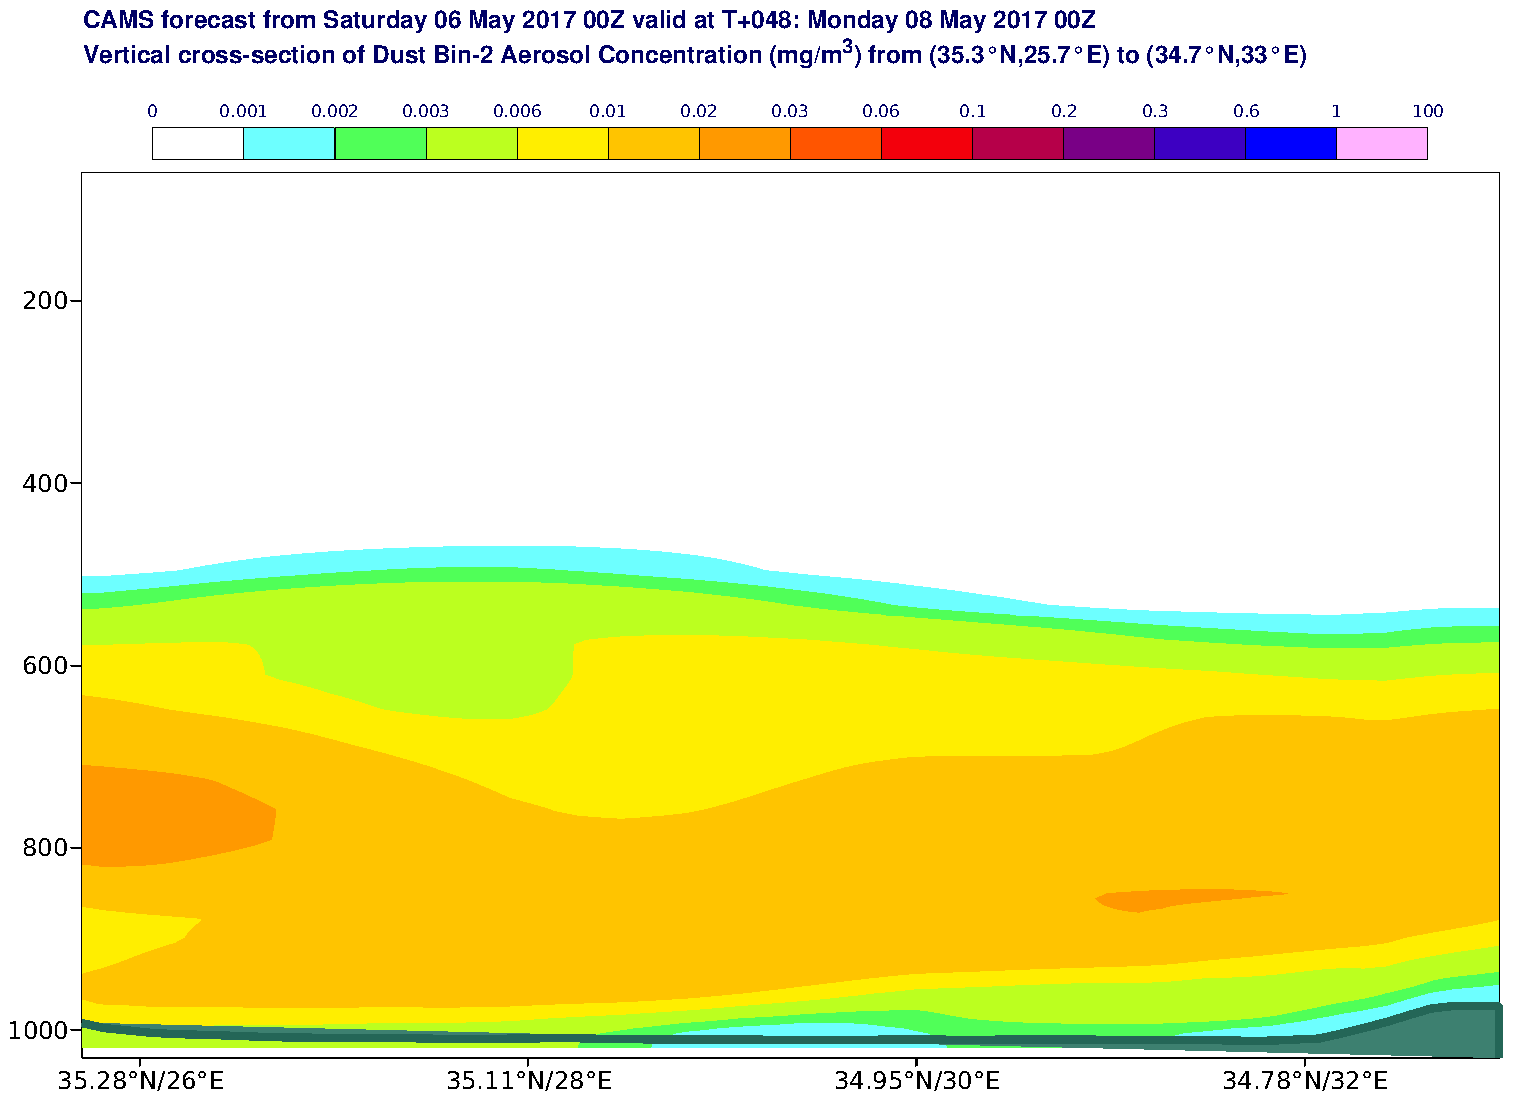 Vertical cross-section of Dust Bin-2 Aerosol Concentration (mg/m3) valid at T48 - 2017-05-08 00:00